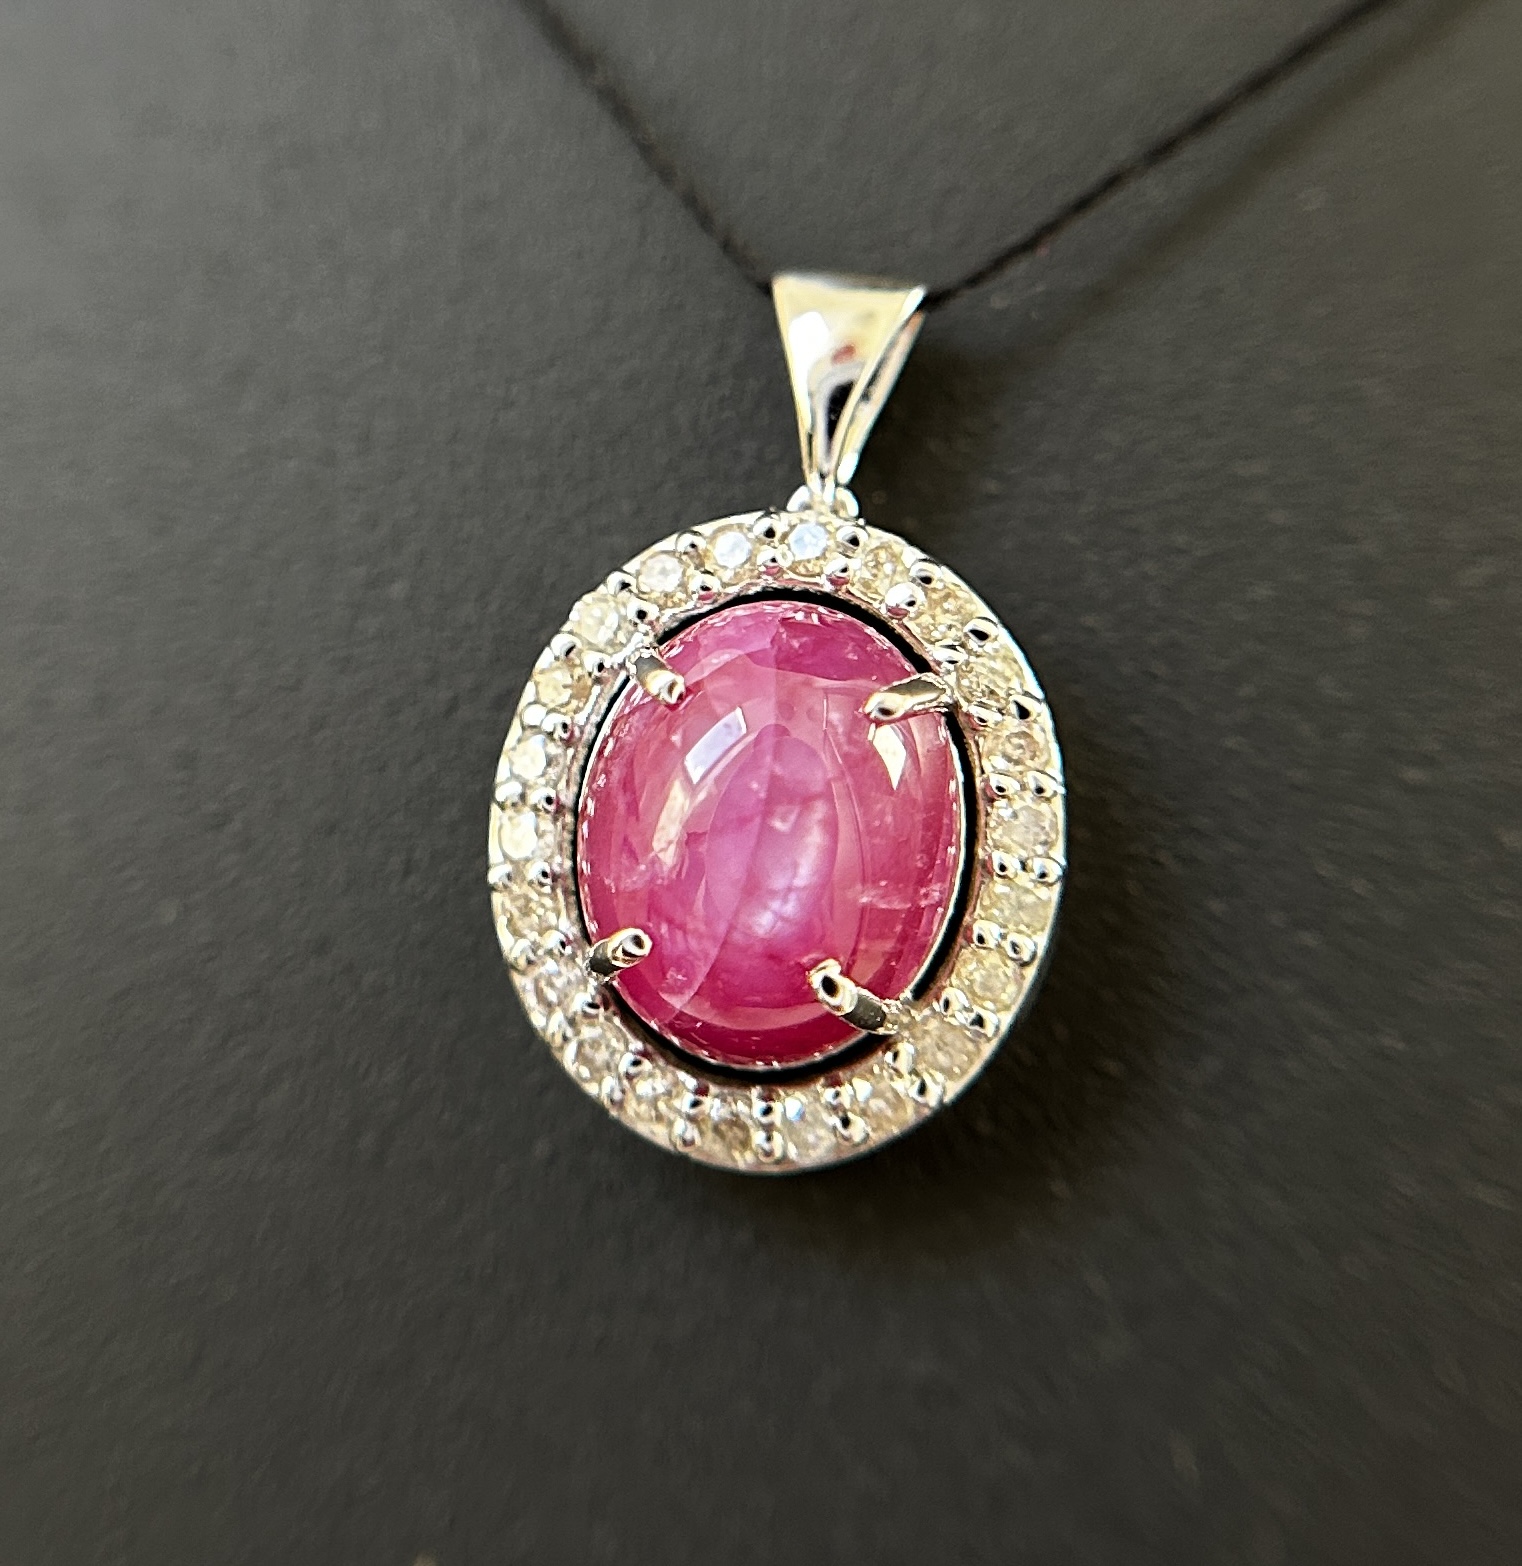 Beautiful Natural Star Ruby Pendant 2.35Ct With Natural Diamonds & 18k Gold - Image 4 of 10